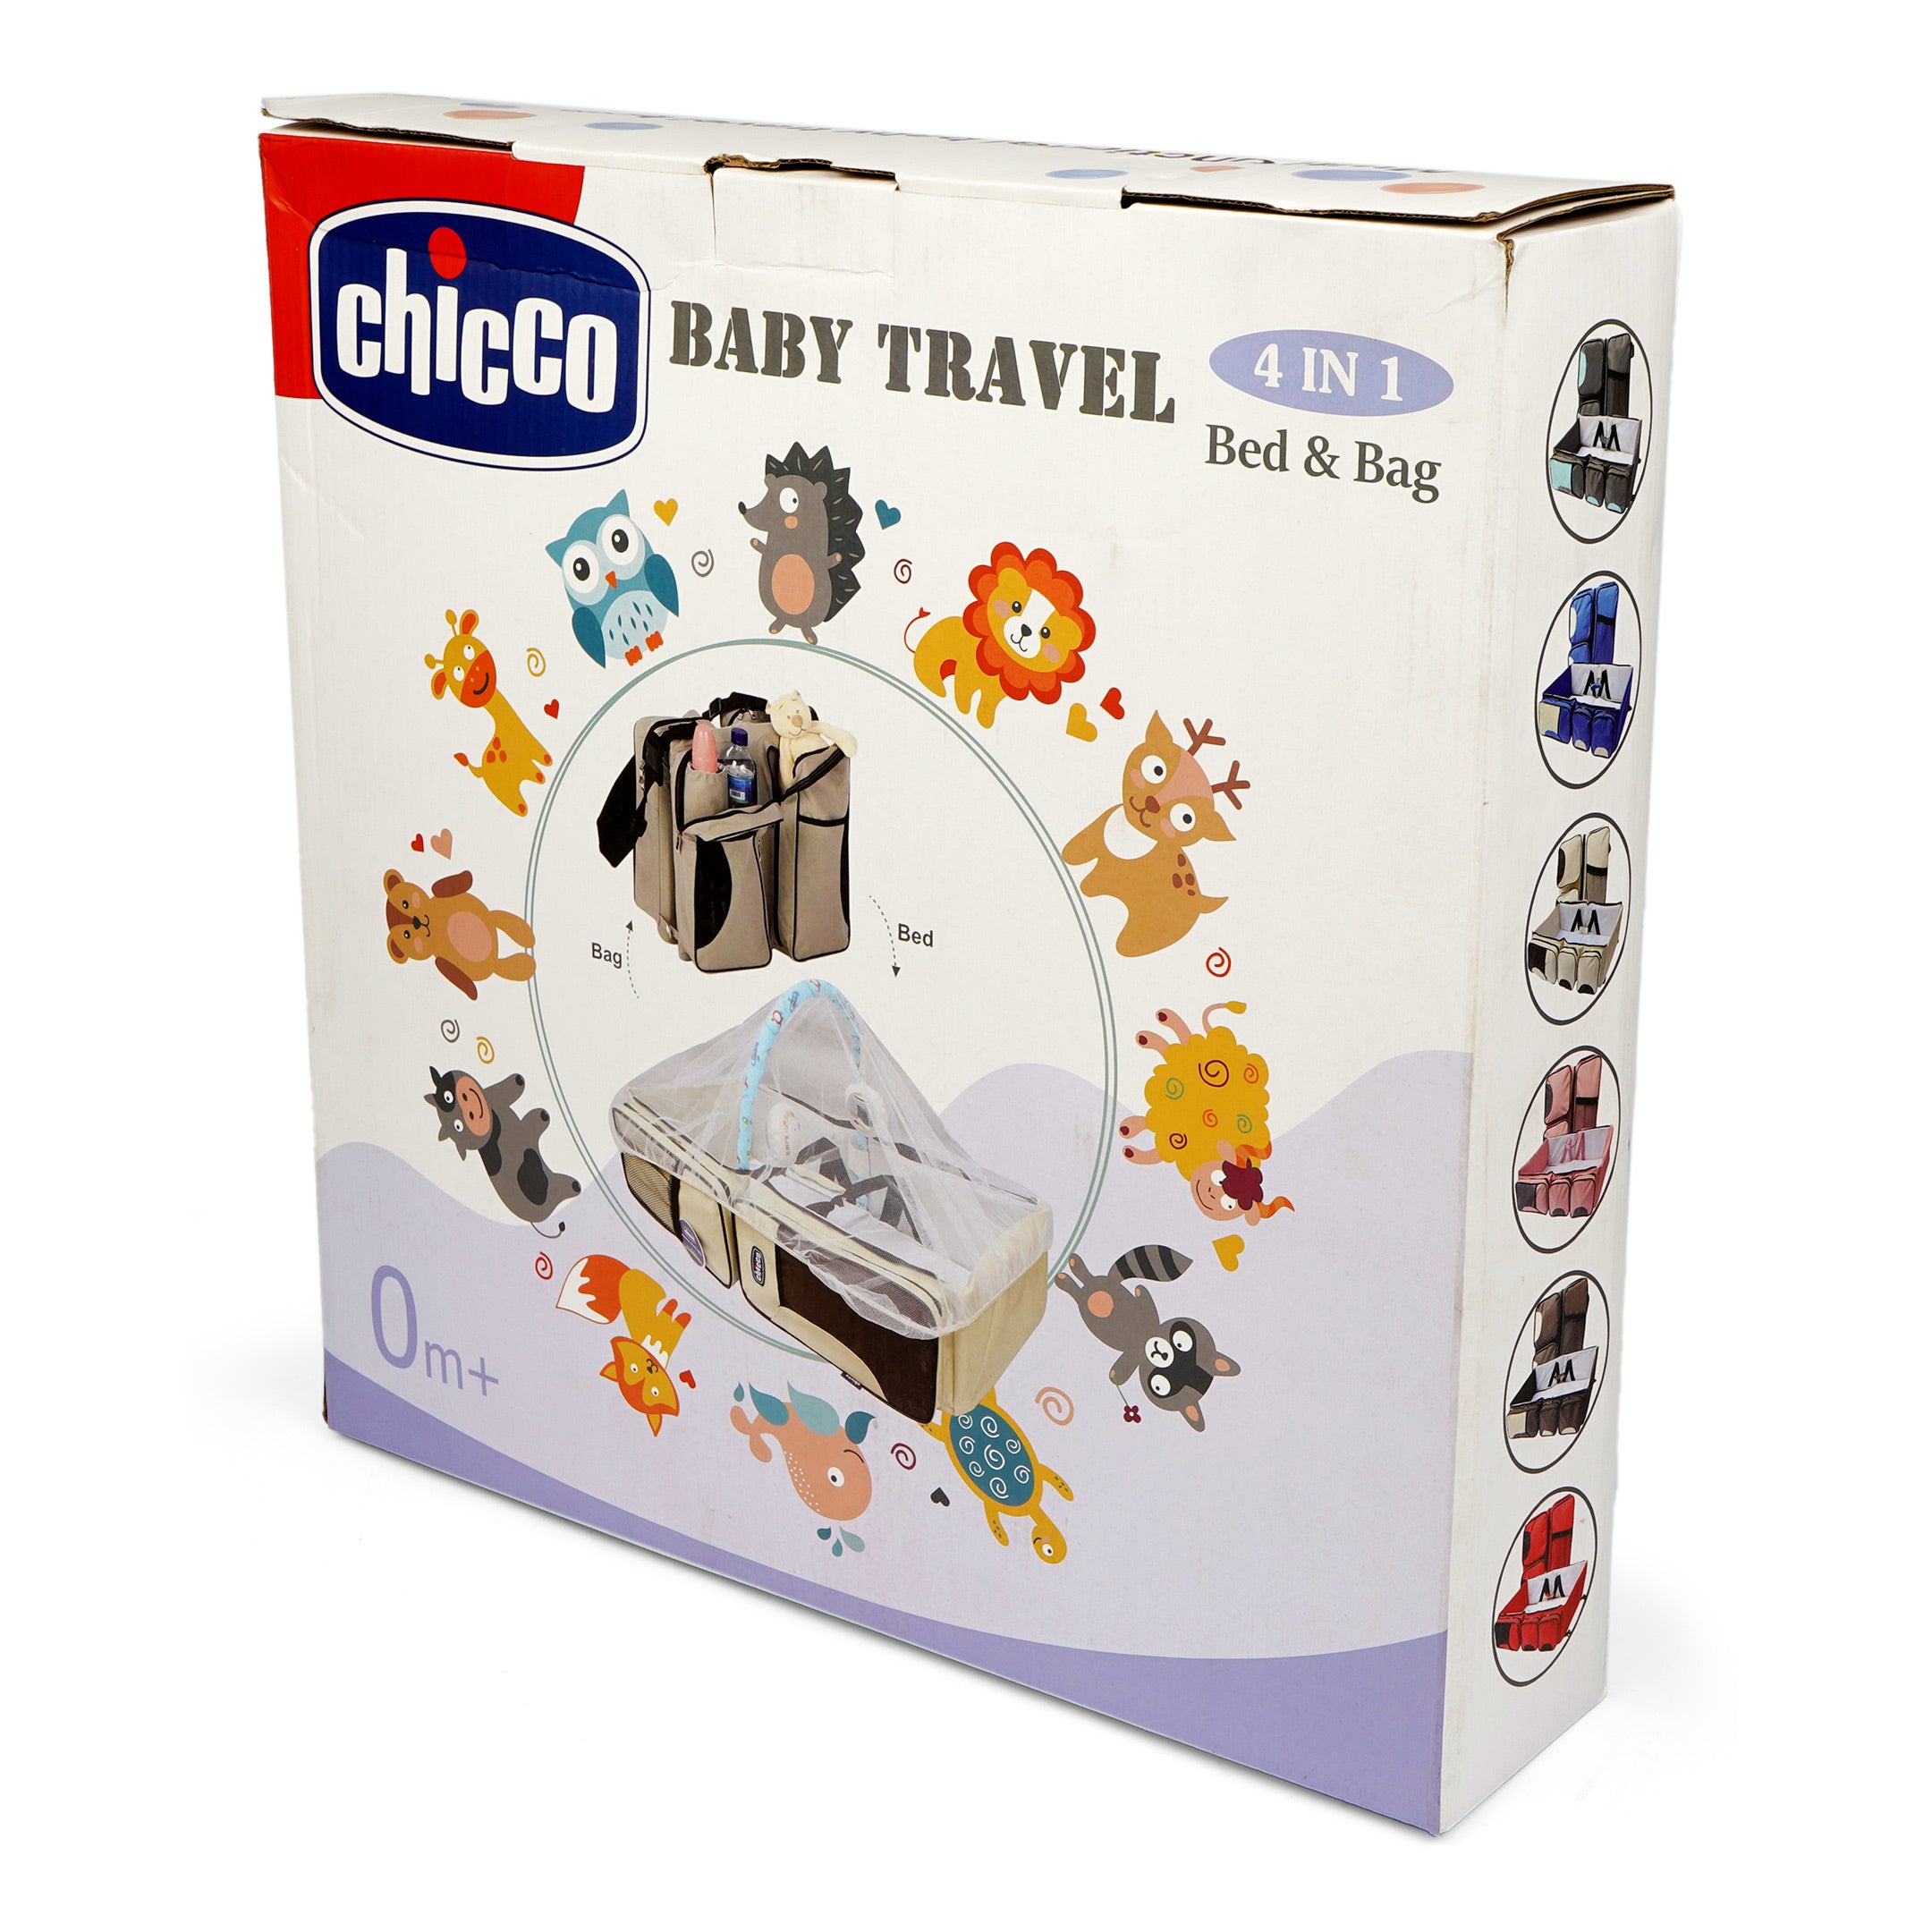 Chicco Baby Travel Bag & Bed 4-in-1